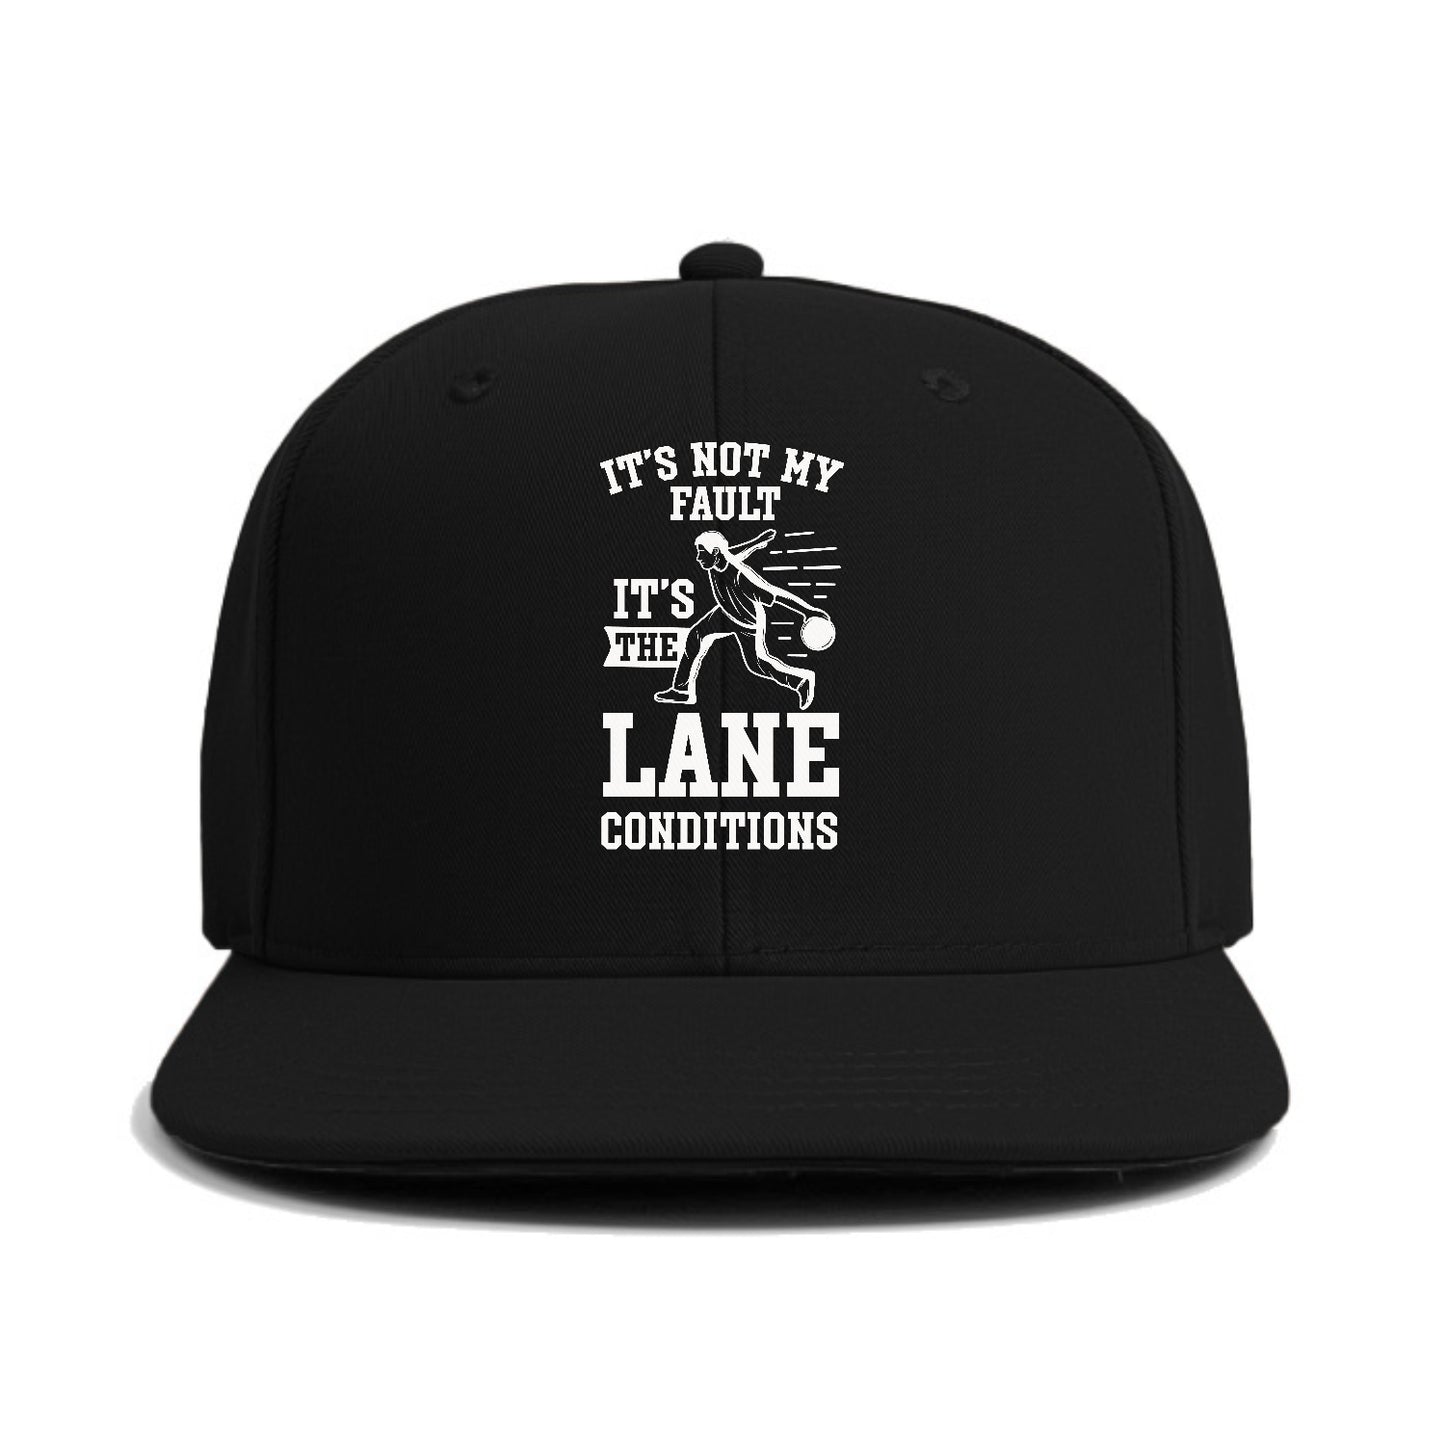 Bowl with Confidence: Embrace your Bowling Skills to Conquer the Lanes Hat